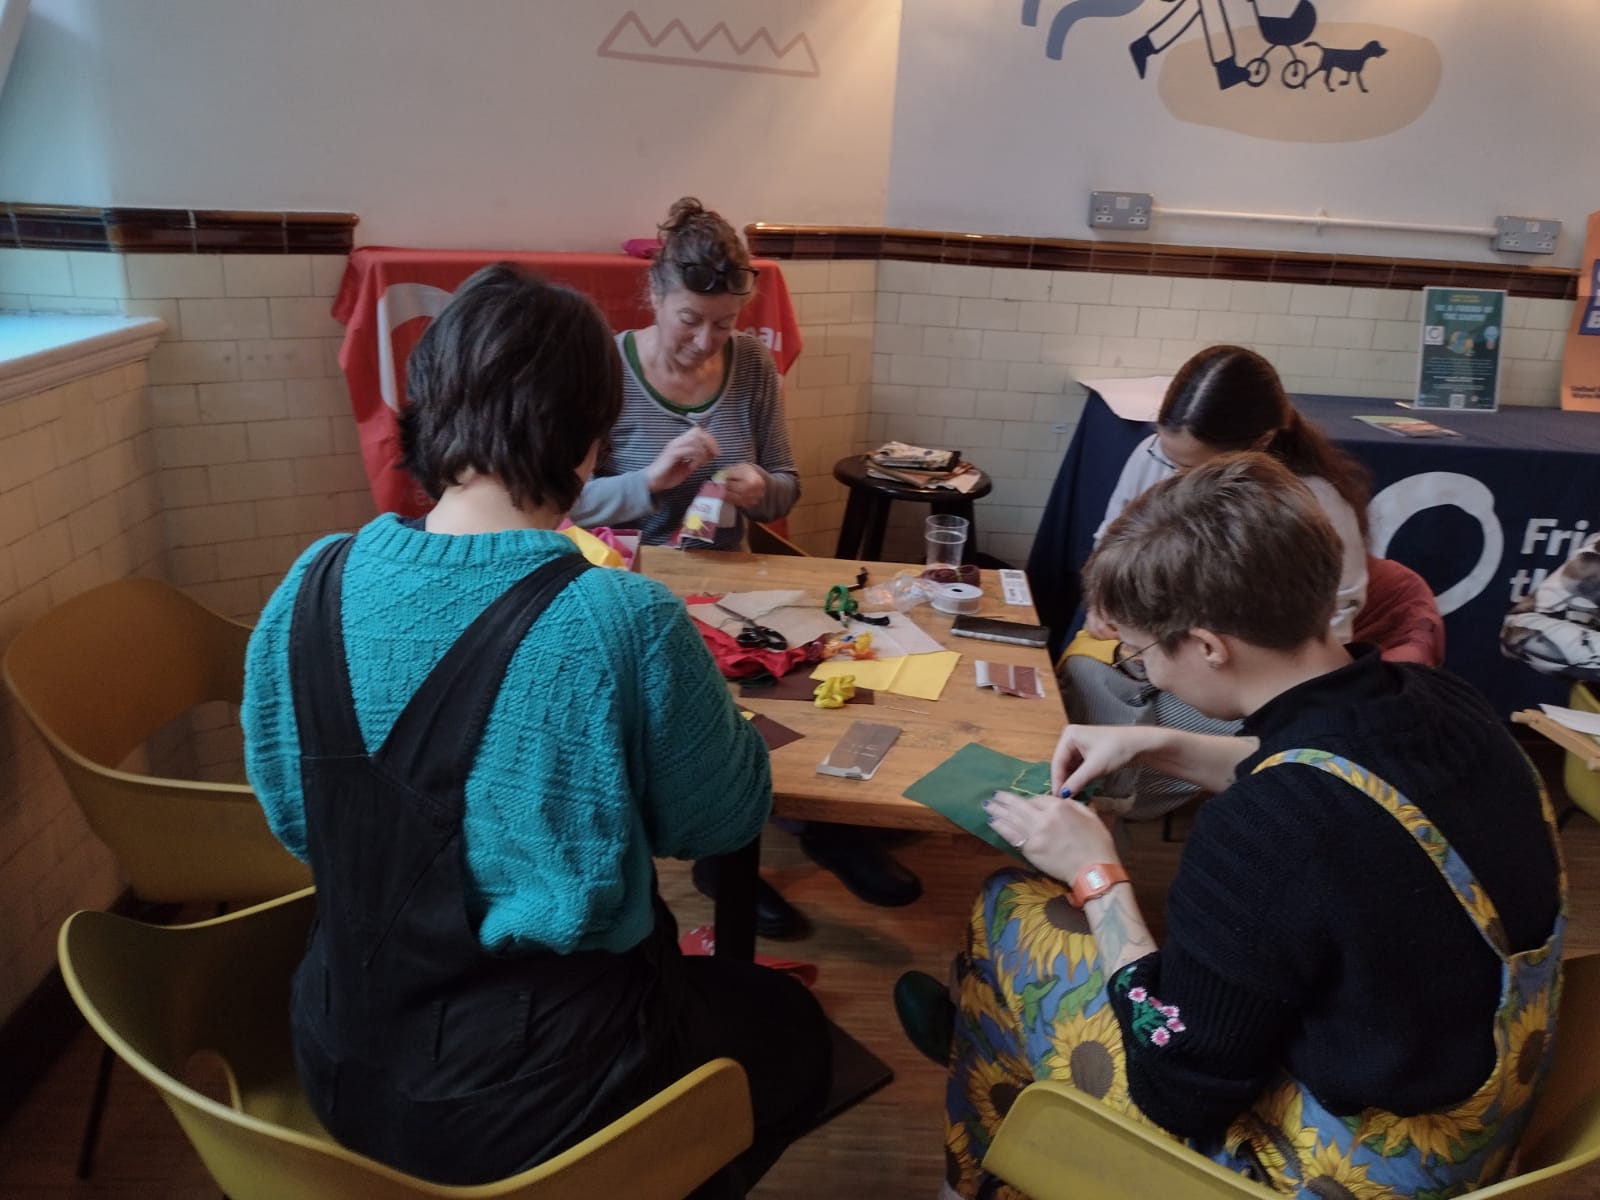 People sitting around a table making quilts